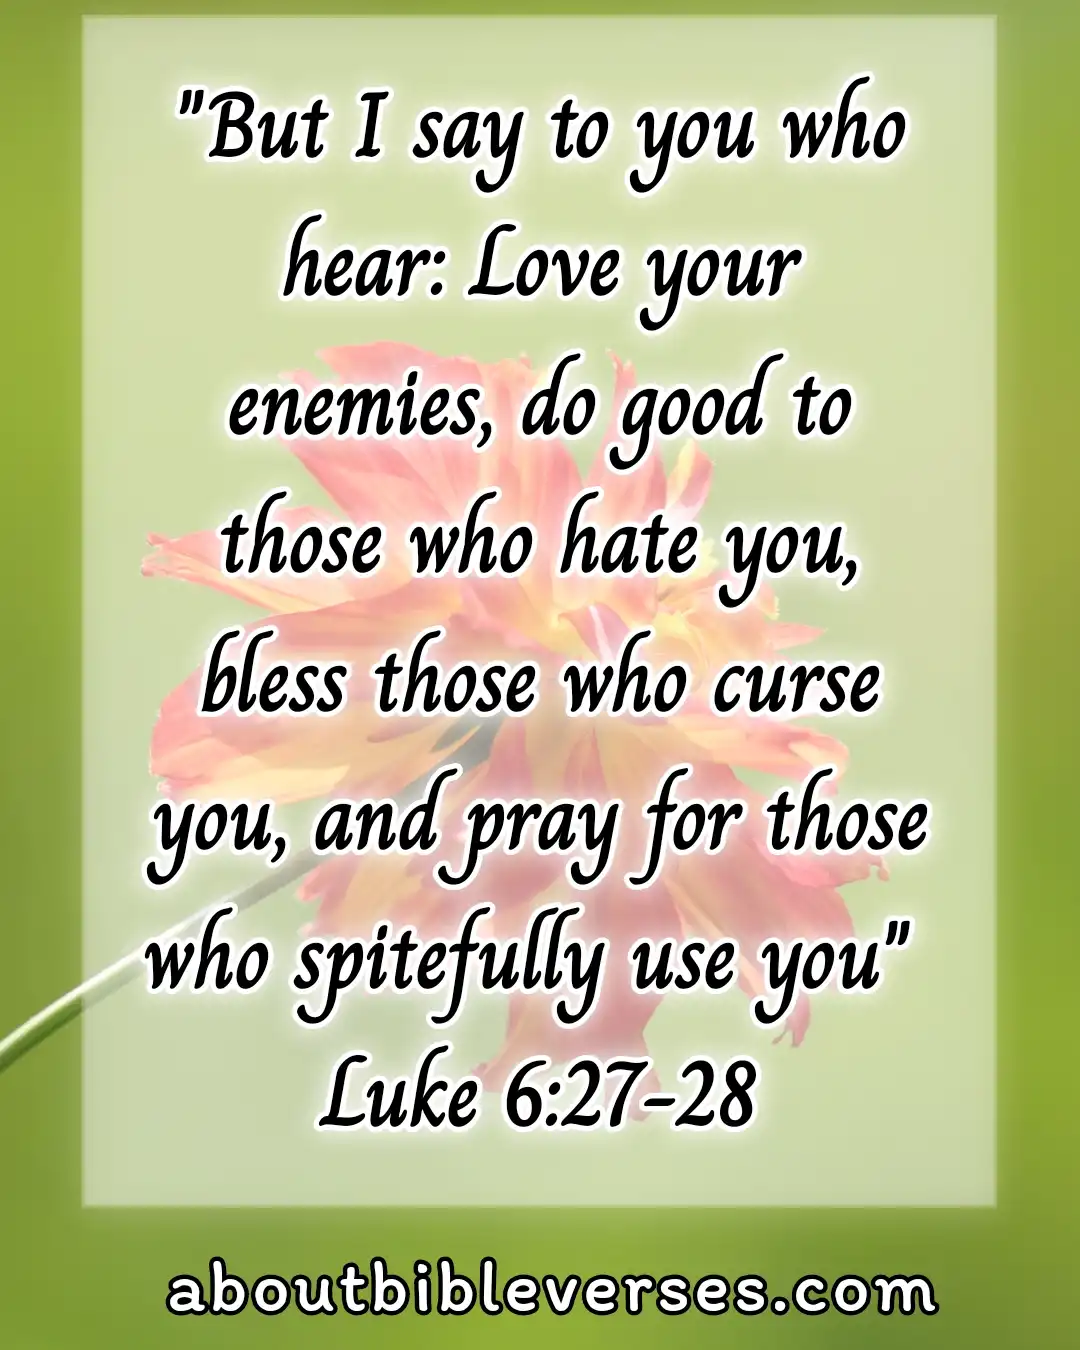 Happy Morning Tuesday Blessings Bible Verse (Luke 6:27-28)